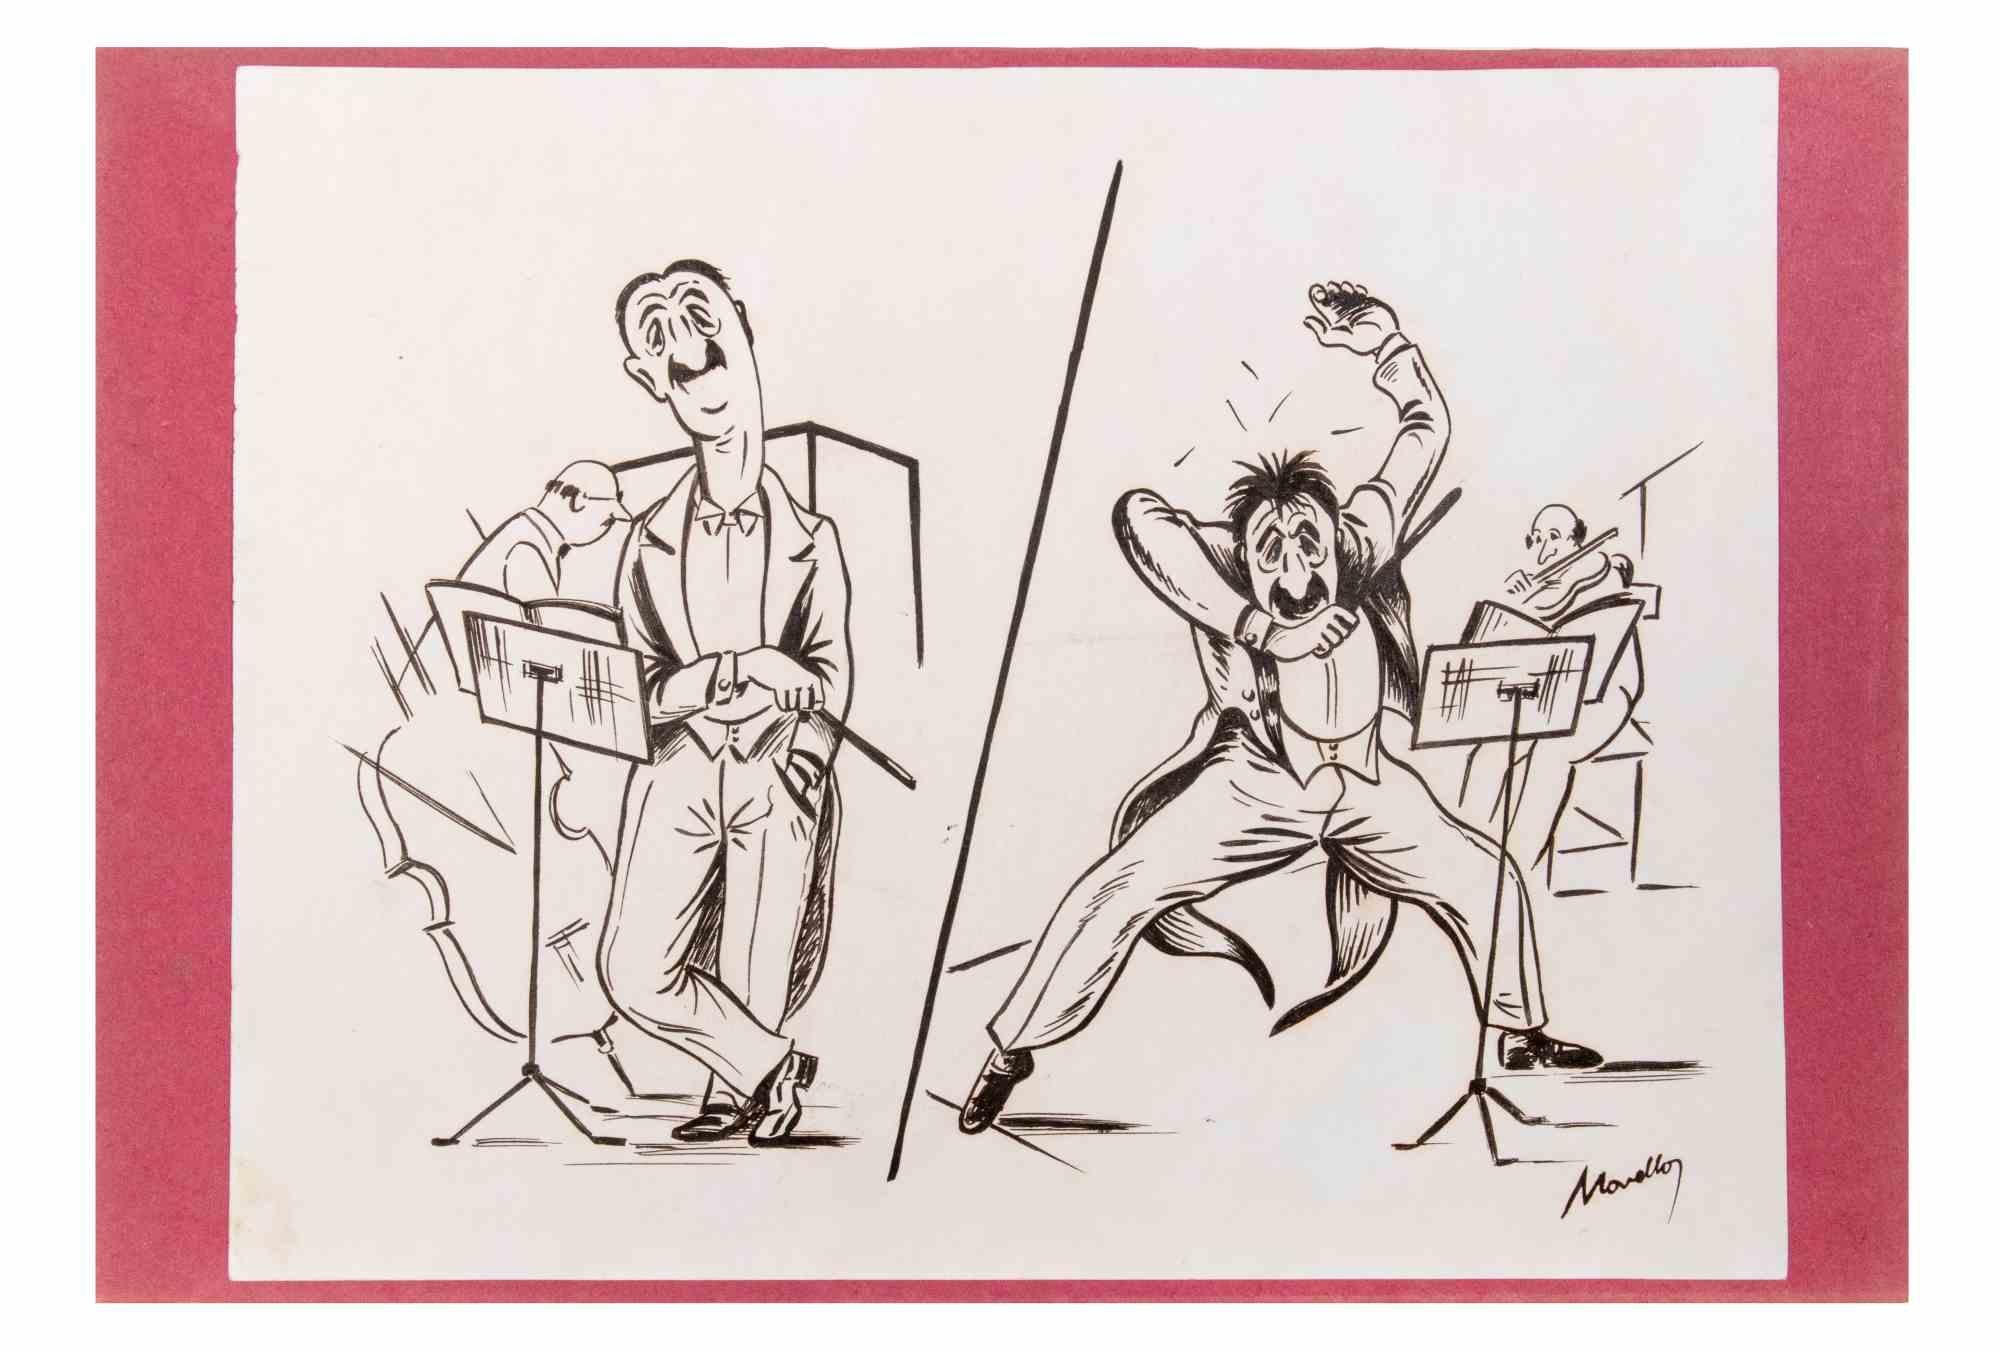 Drawing by Novello for the cartoon " The conductor" during Verdi, Wagner and the waltz " Don't love me like this".

ink drawing. Handsigned in the lower right part. 21x30 cm. Good conditions.